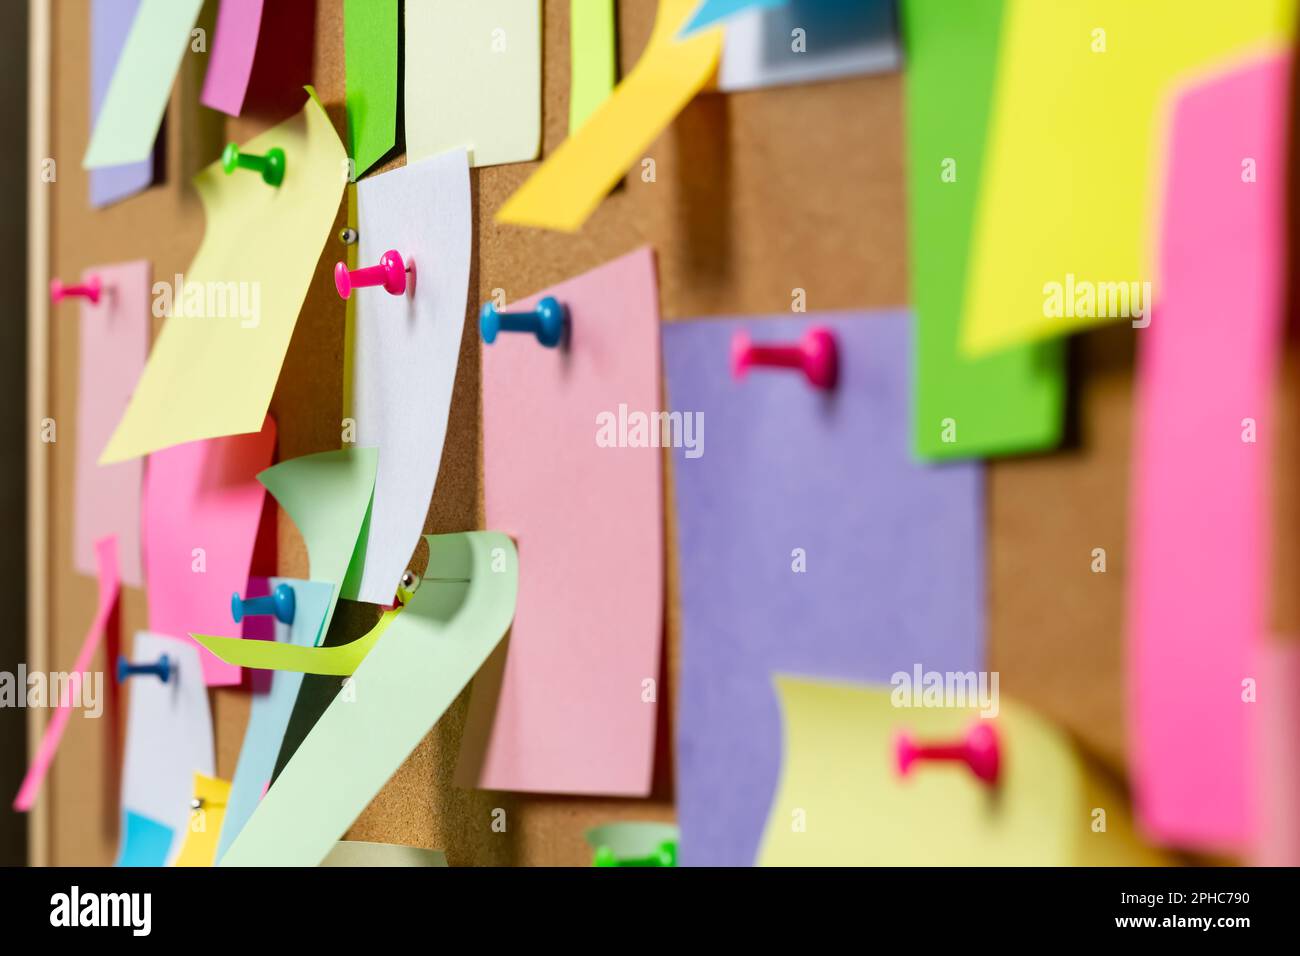 Post blank stickers on cork bulletin board. Concept of business notes. Stock Photo